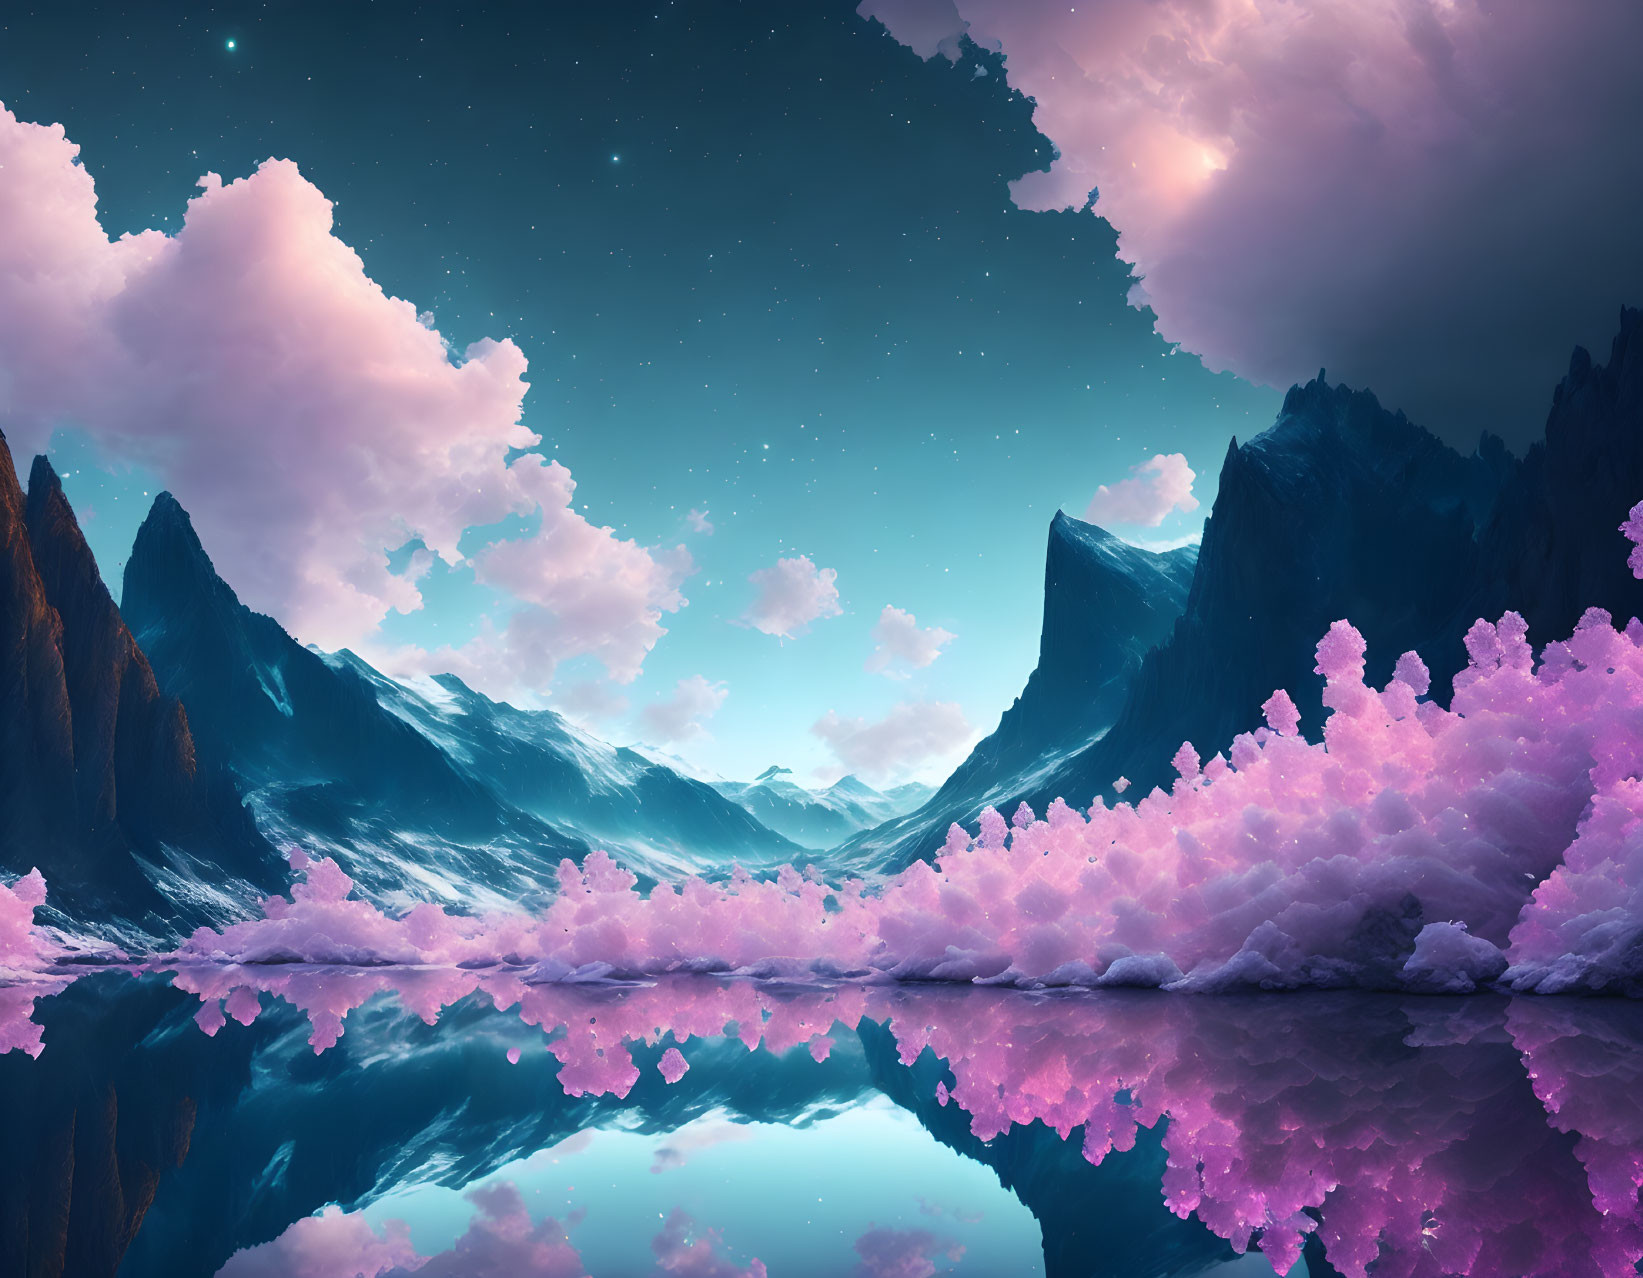 Fantasy landscape with pink cloud-like trees, mirrored lake, and twilight sky